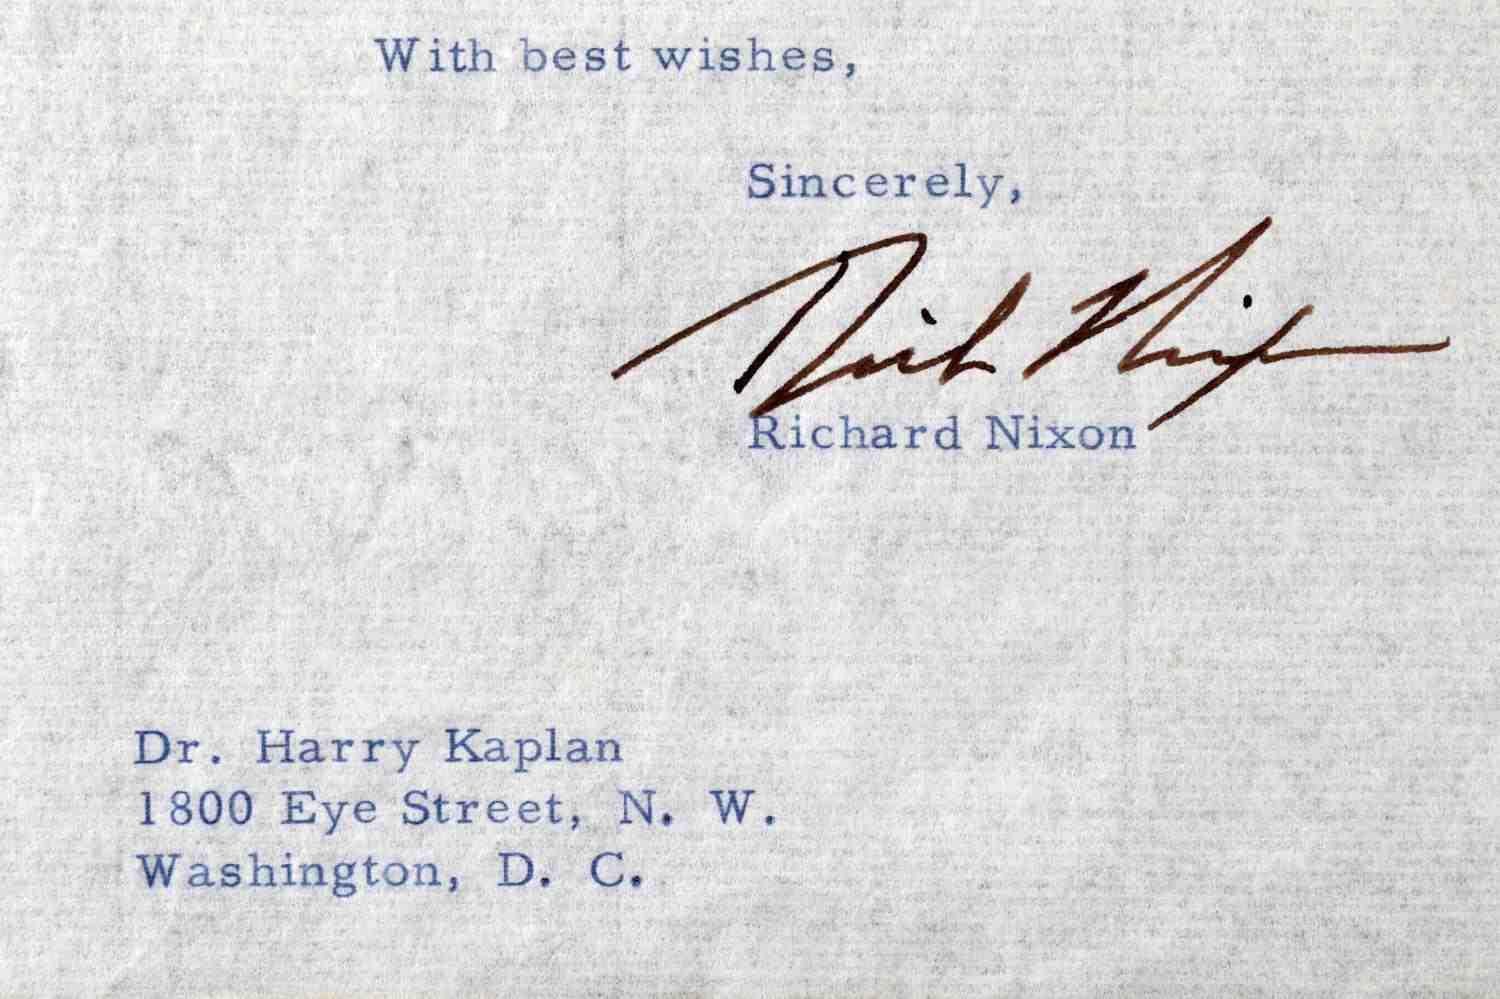 RICHARD NIXON SIGNED LETTER TO PERSONAL DENTIST